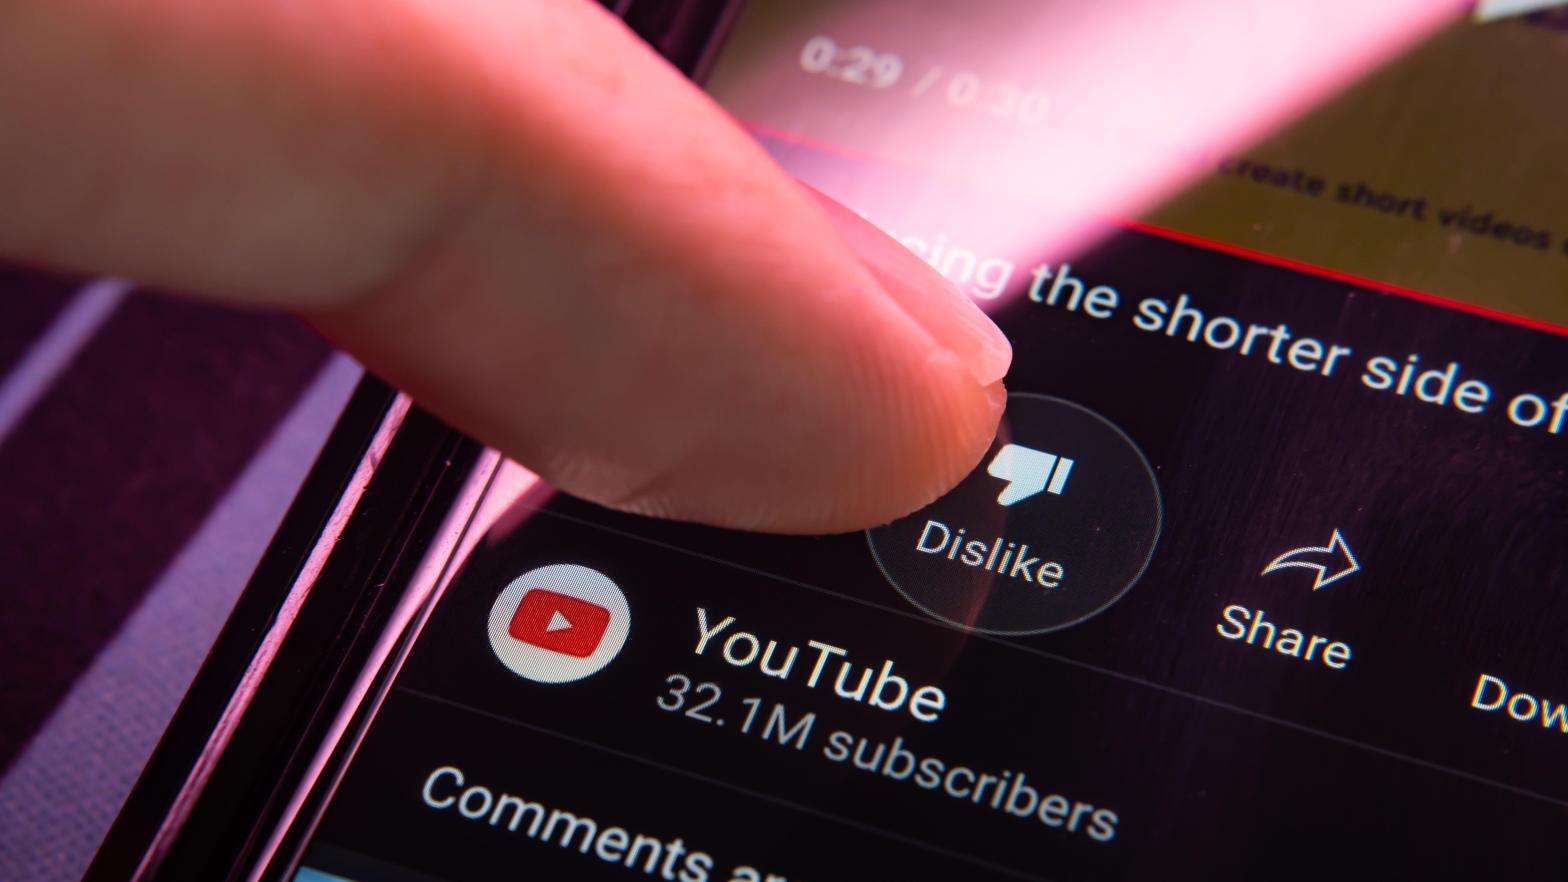 YouTube announced AI tools to police livestreams and detect spam comments.  (Image: Wachiwit, Shutterstock)